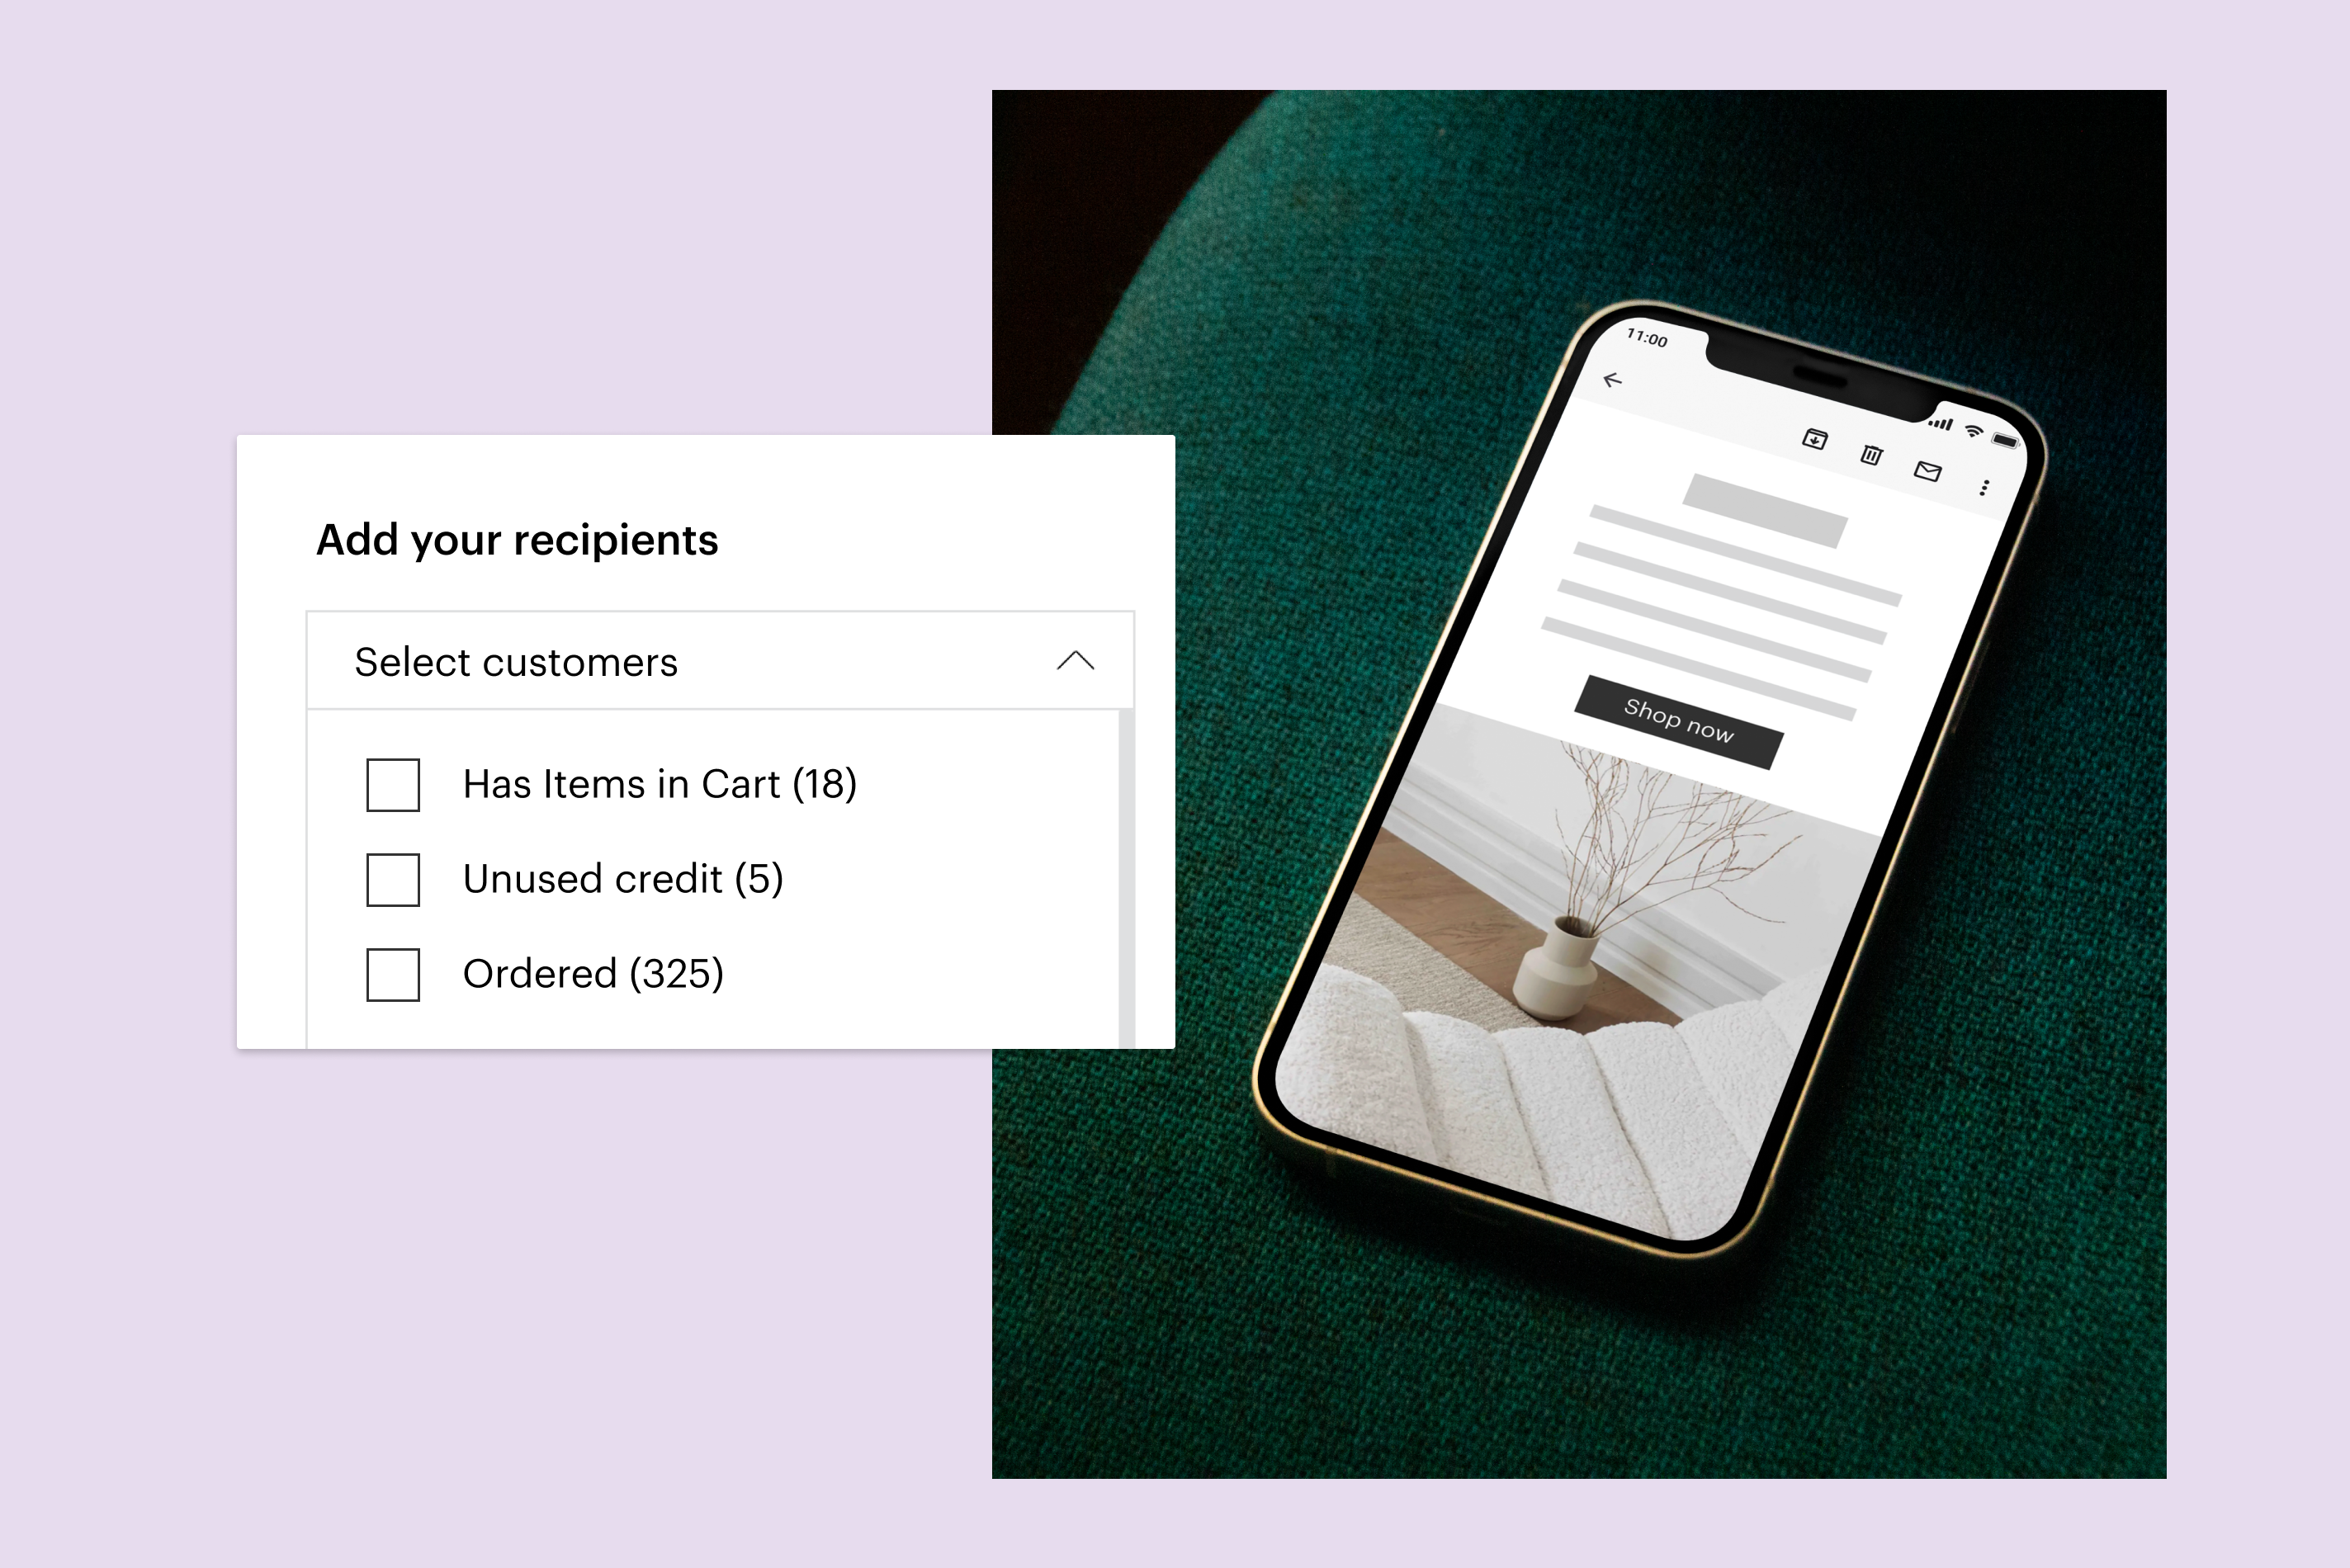 An email is created with the option to send to custom, segmented lists